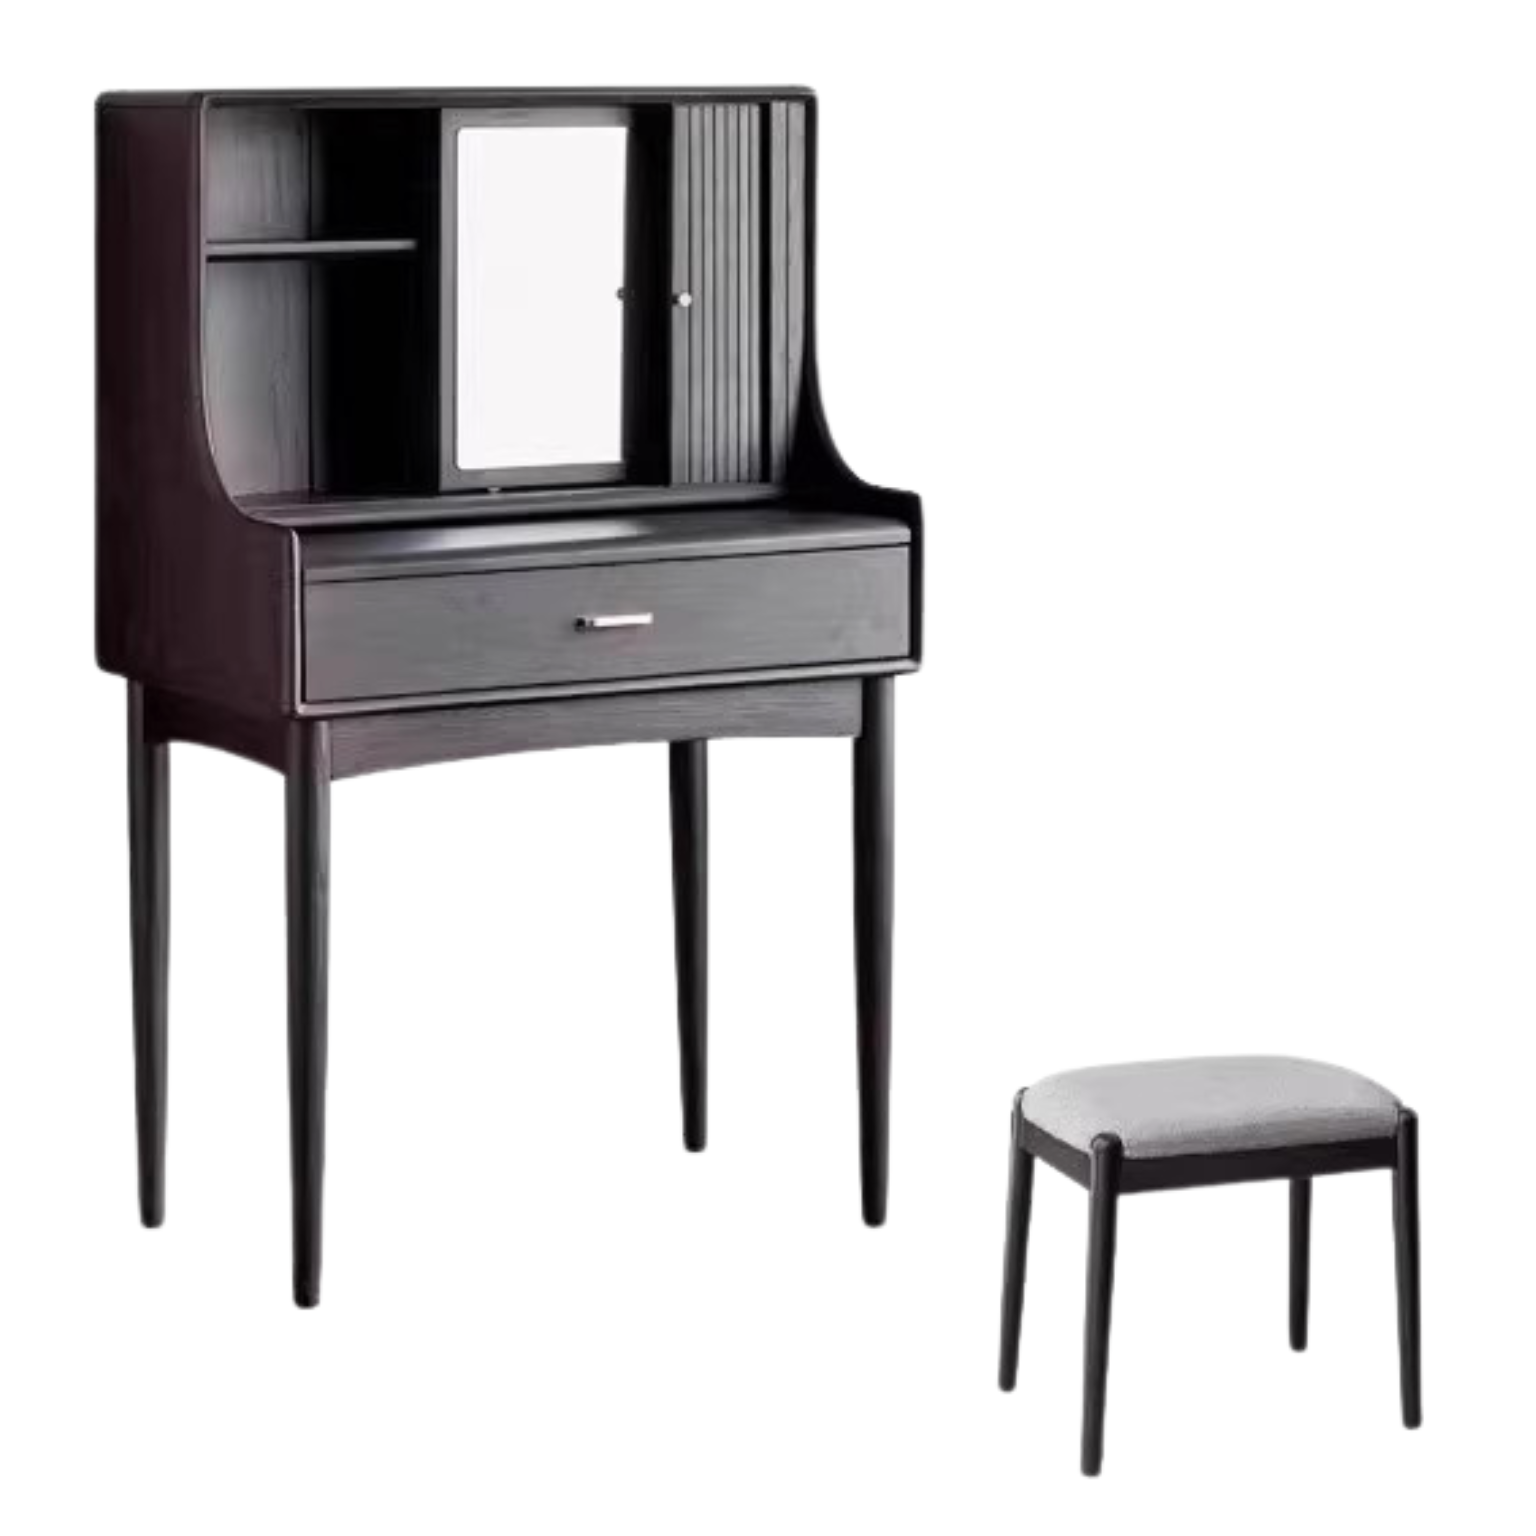 Oak solid wood dressing table Smoked color: